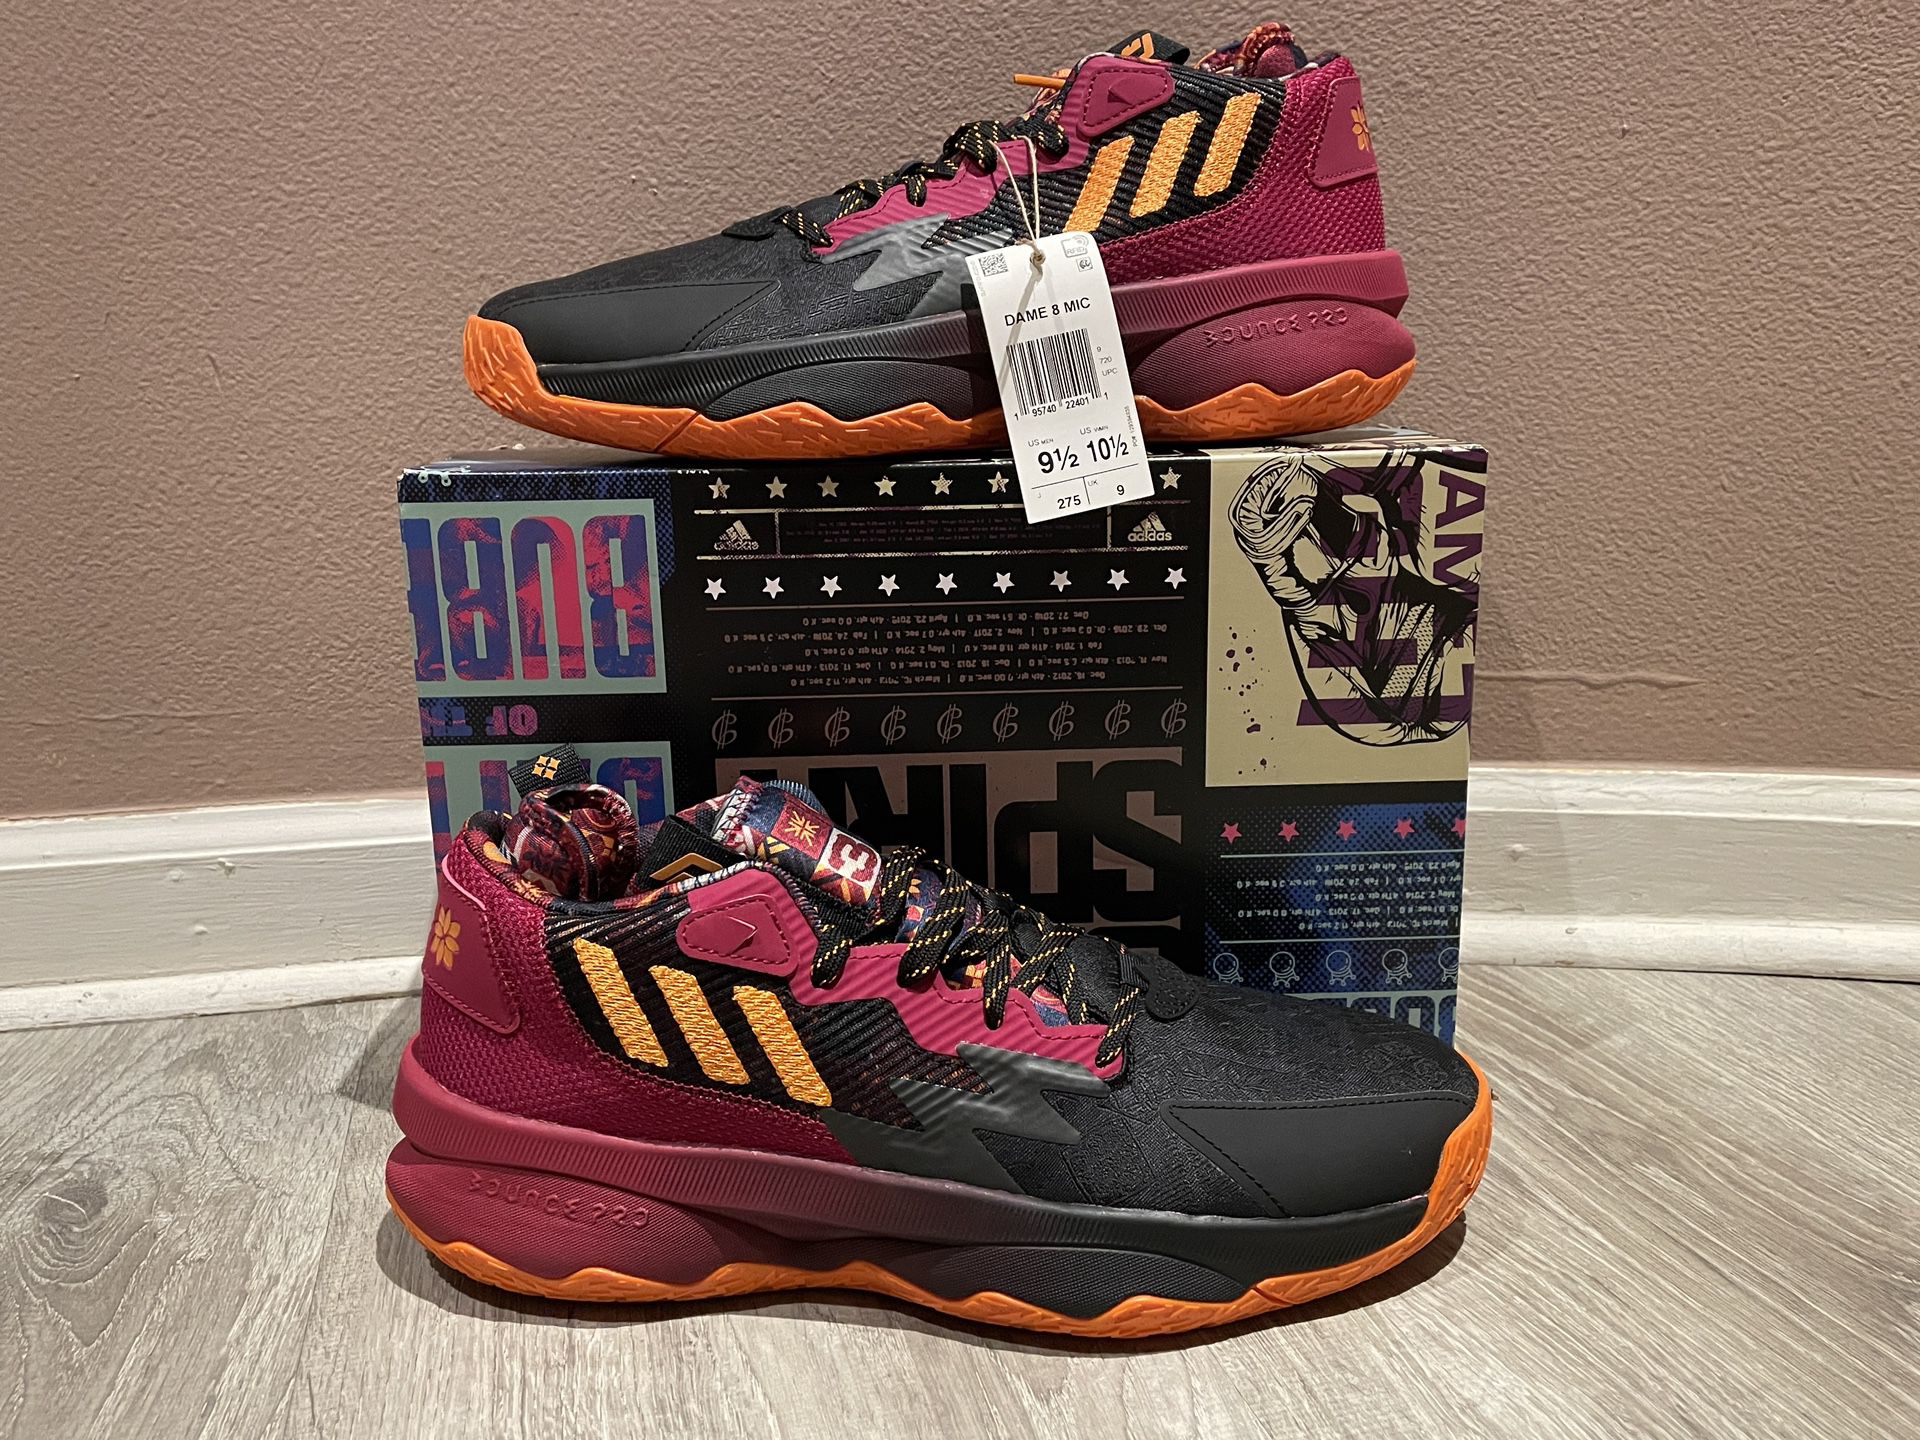 Adidas Dame 8 Signature Basketball Shoe - Size 9.5 NEW BOX for Sale in Park, - OfferUp